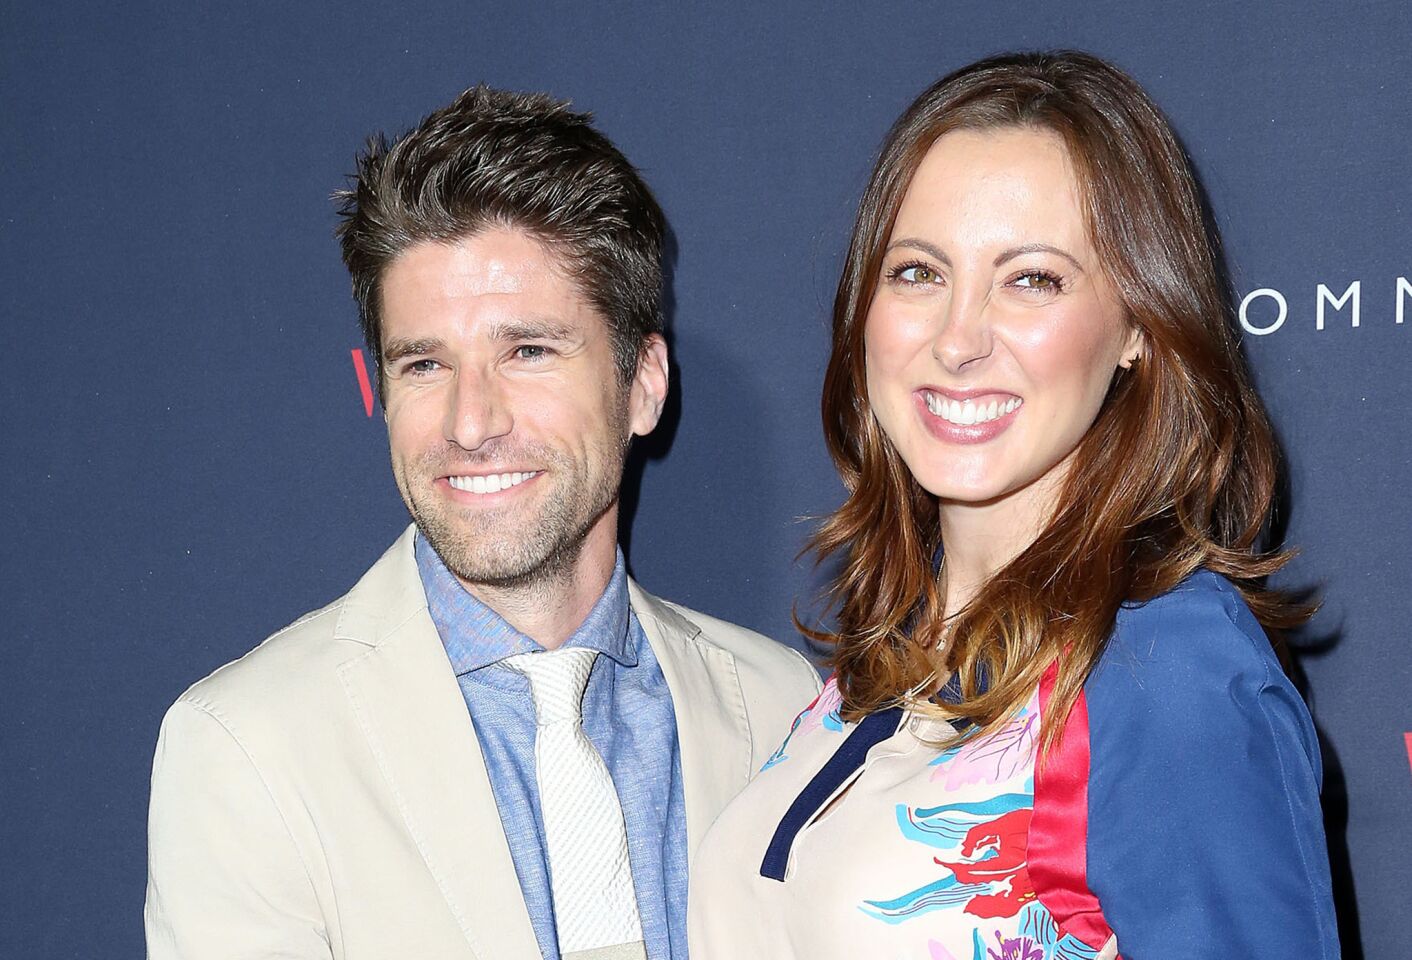 Actress Eva Amurri Martino, daughter of Susan Sarandon, and retired soccer star Kyle Martino are now first-time parents. The pair are "over the moon in love with our little girl [Marlowe Mae]," Martino tweeted. The couple tied the knot in October 2011.